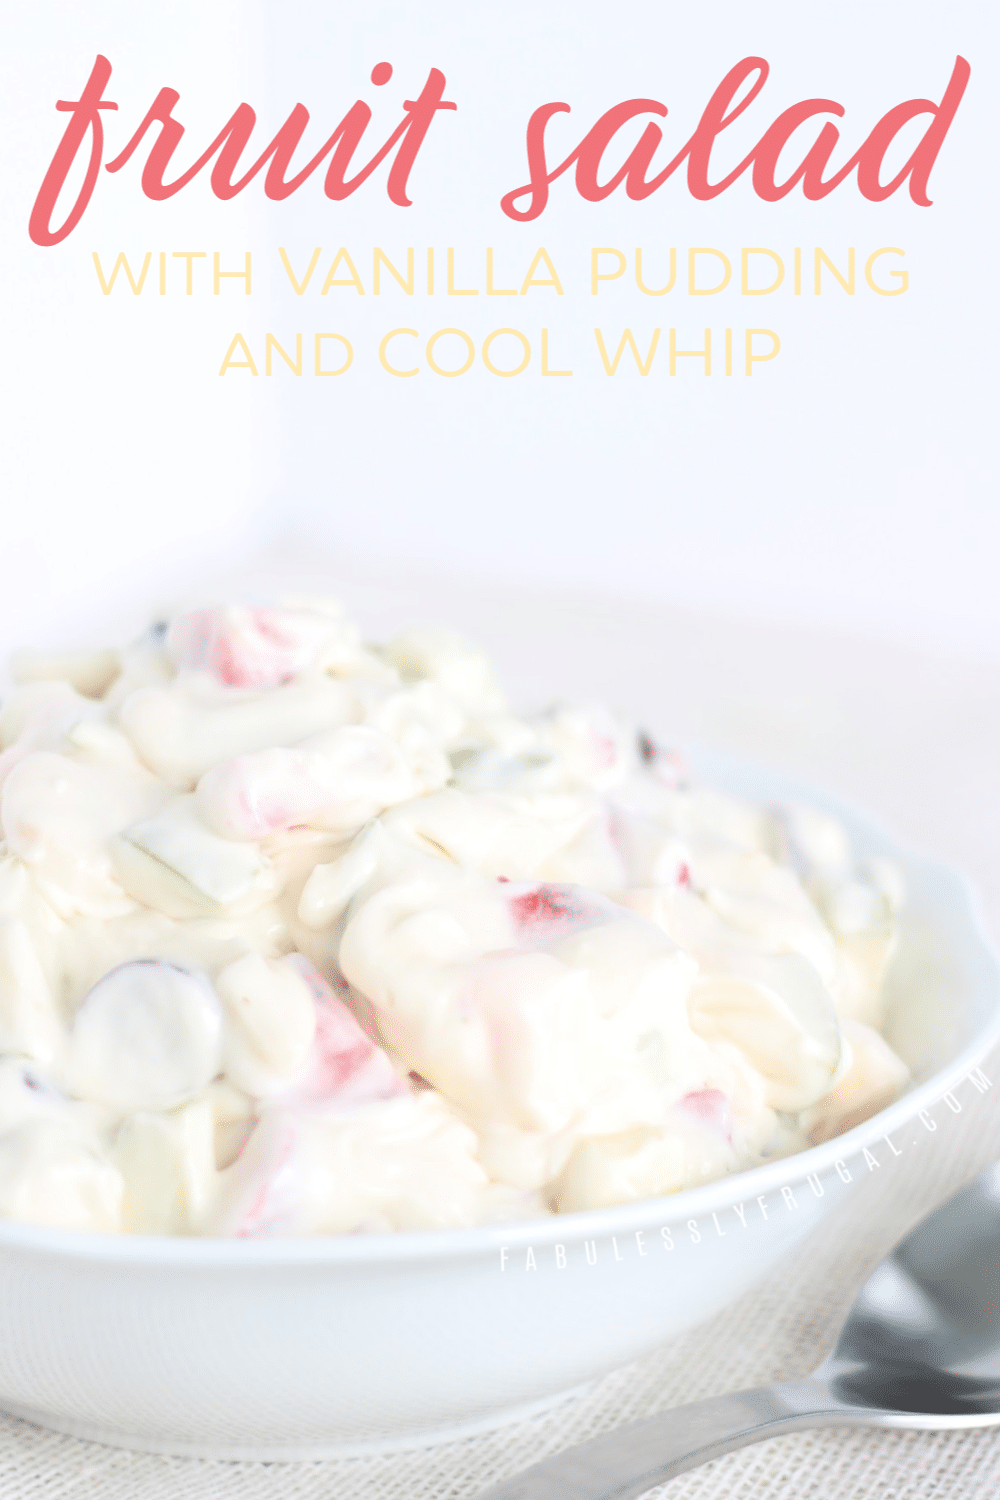 Fruit salad with vanilla pudding and cool whip